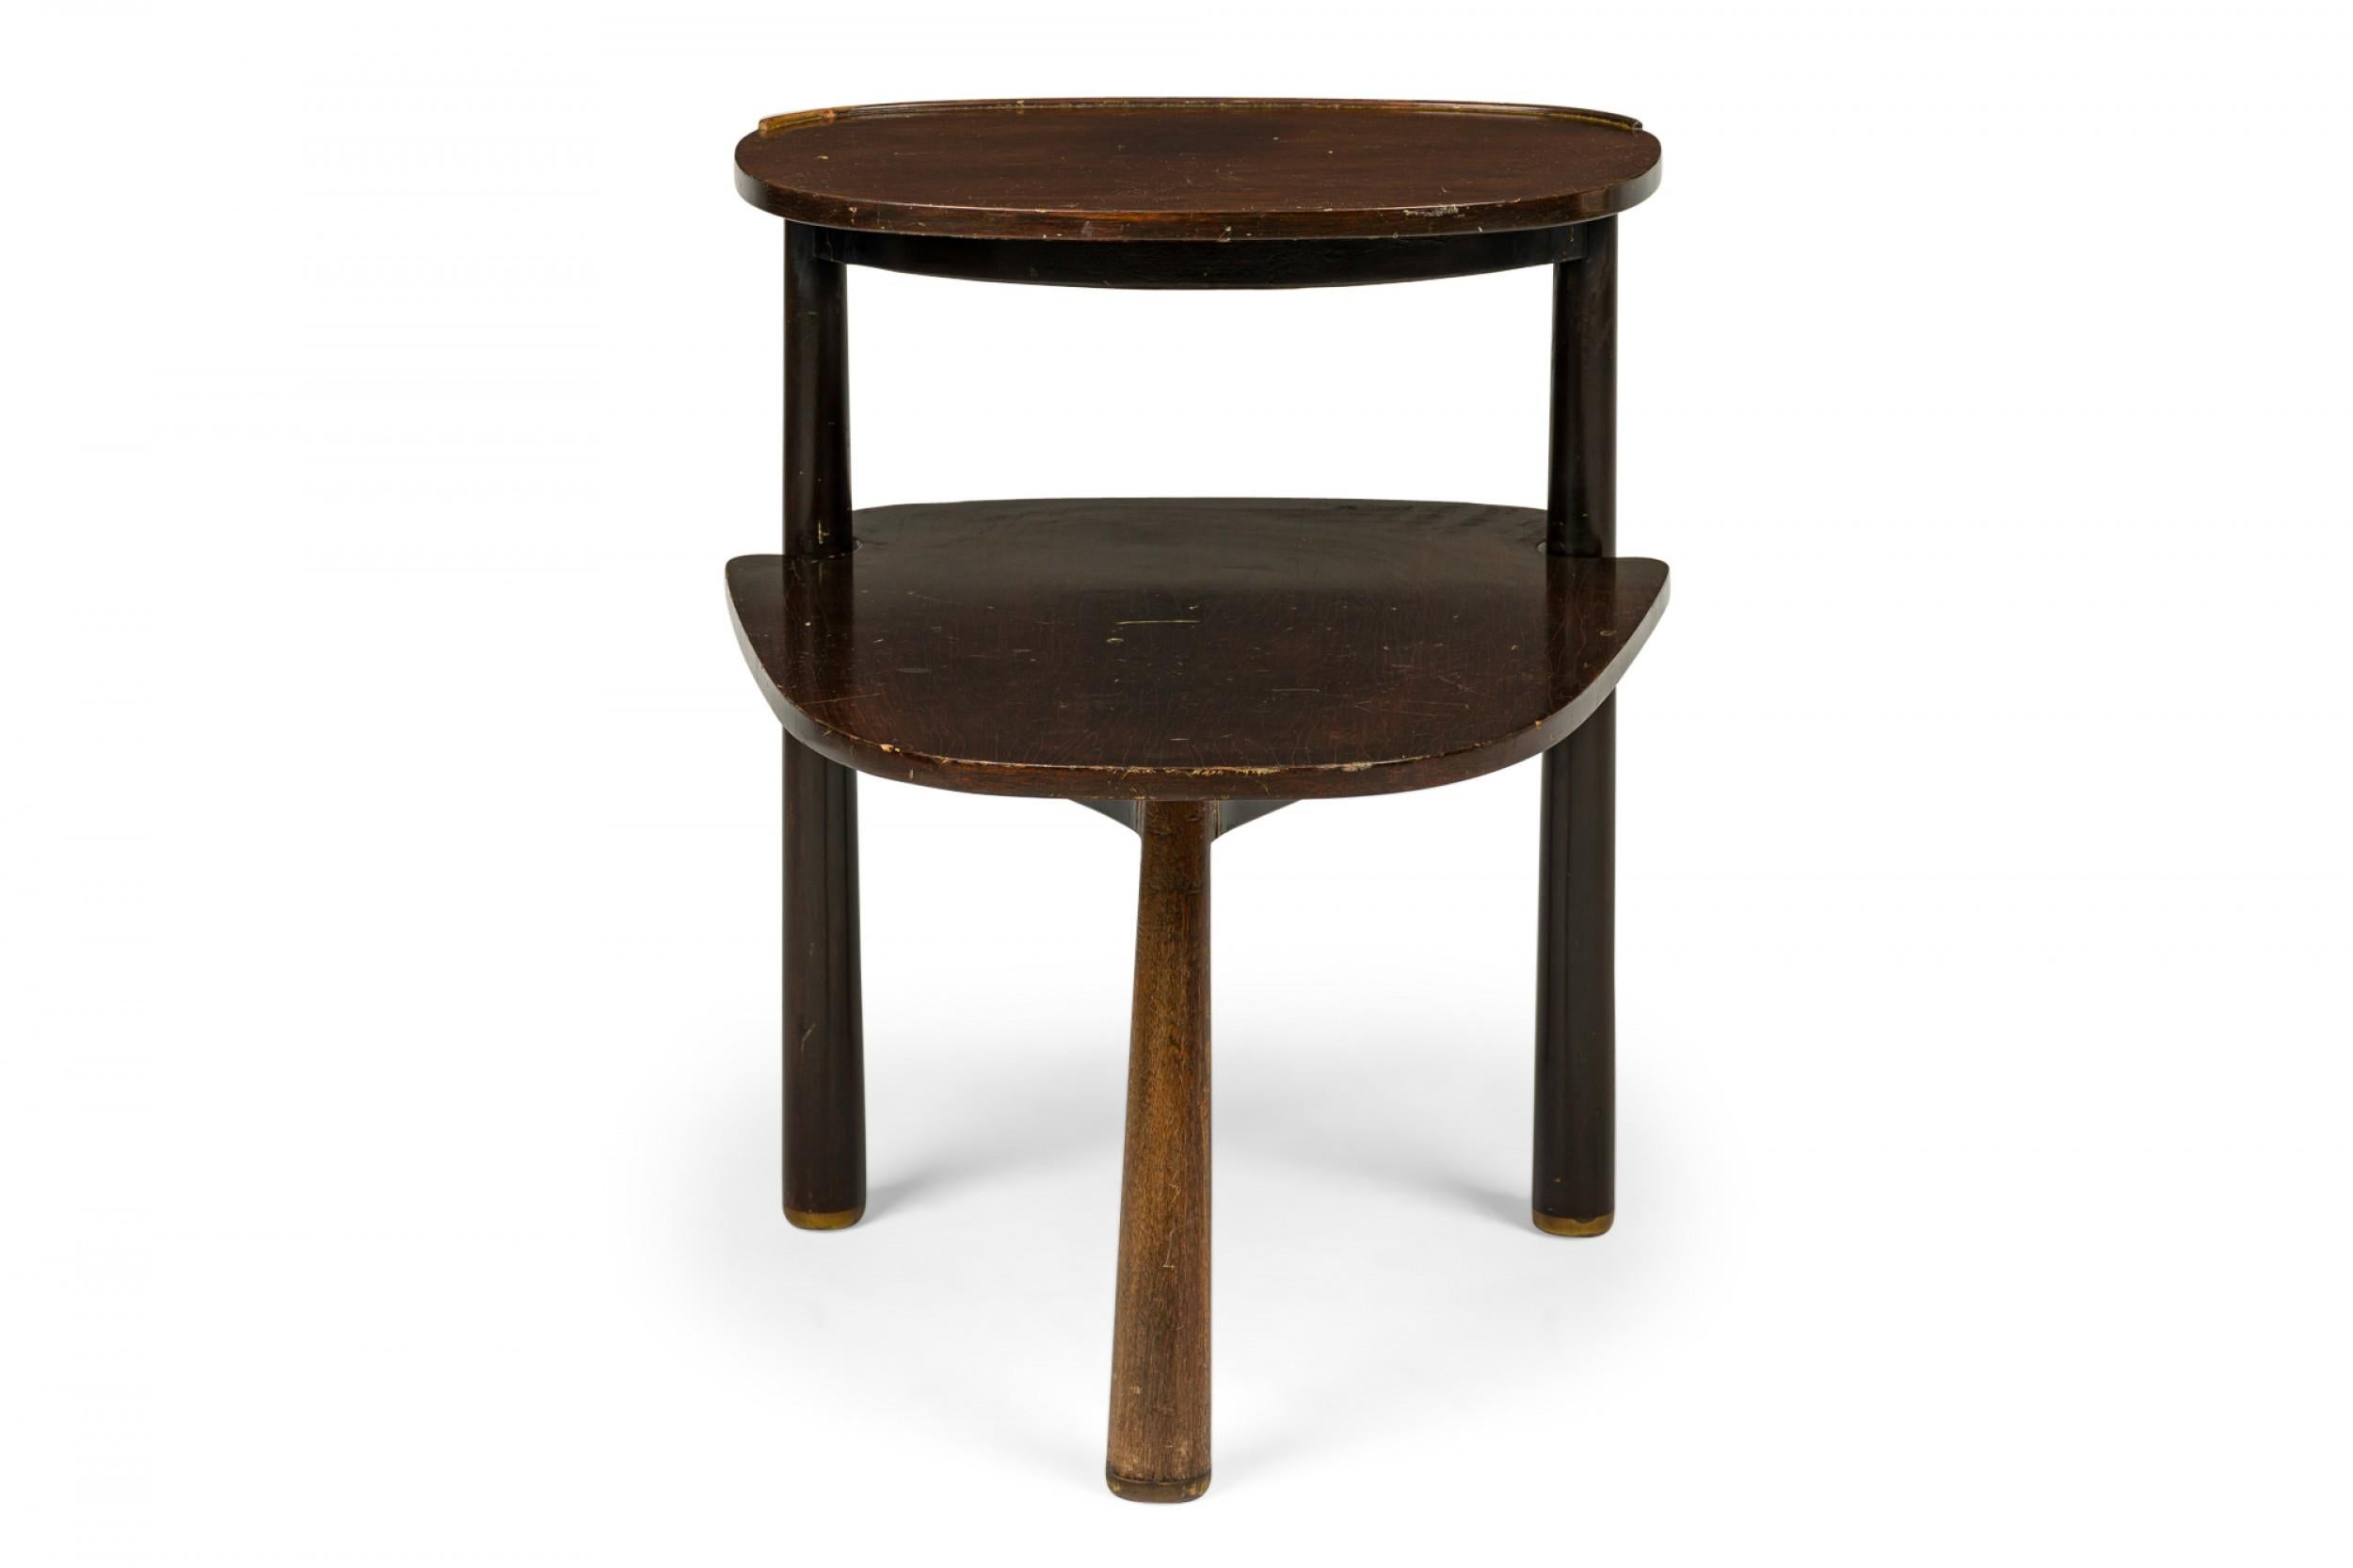 American Mid-Century stepped end / side table with an oblong profile and smaller demilune upper shelf connected to the table top by two dowel supports, resting on three reverse tapered dowel legs. (EDWARD WORMLEY FOR DUNBAR FURNITURE COMPANY).